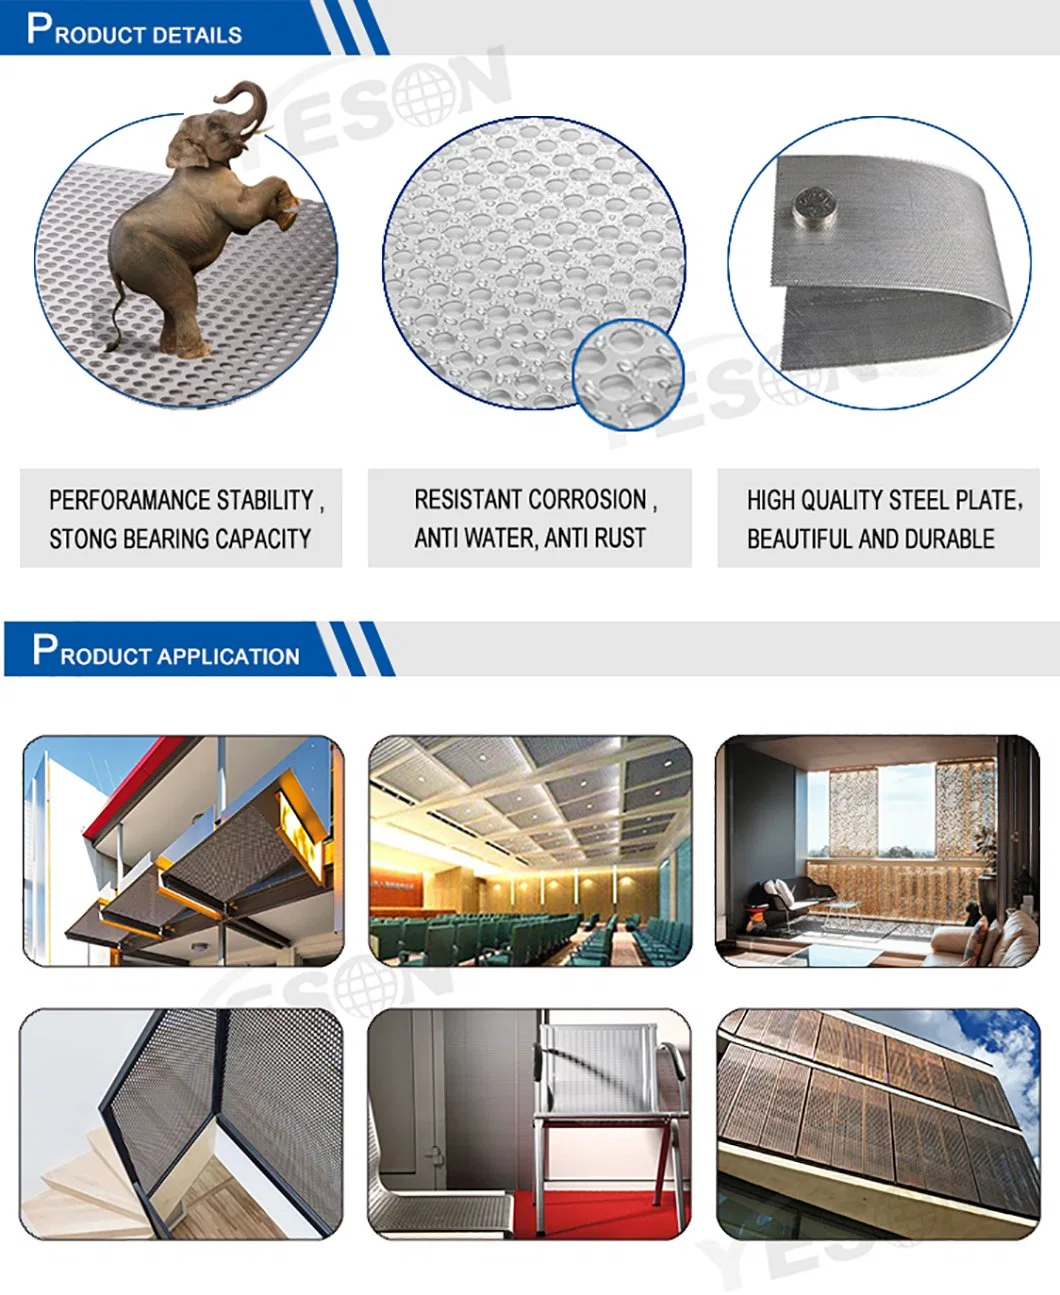 Perforated Corrugated Metal Low Price of Galvanized Stainless Steel Perforated Metal Mesh Sheet Perforated Metal Strip